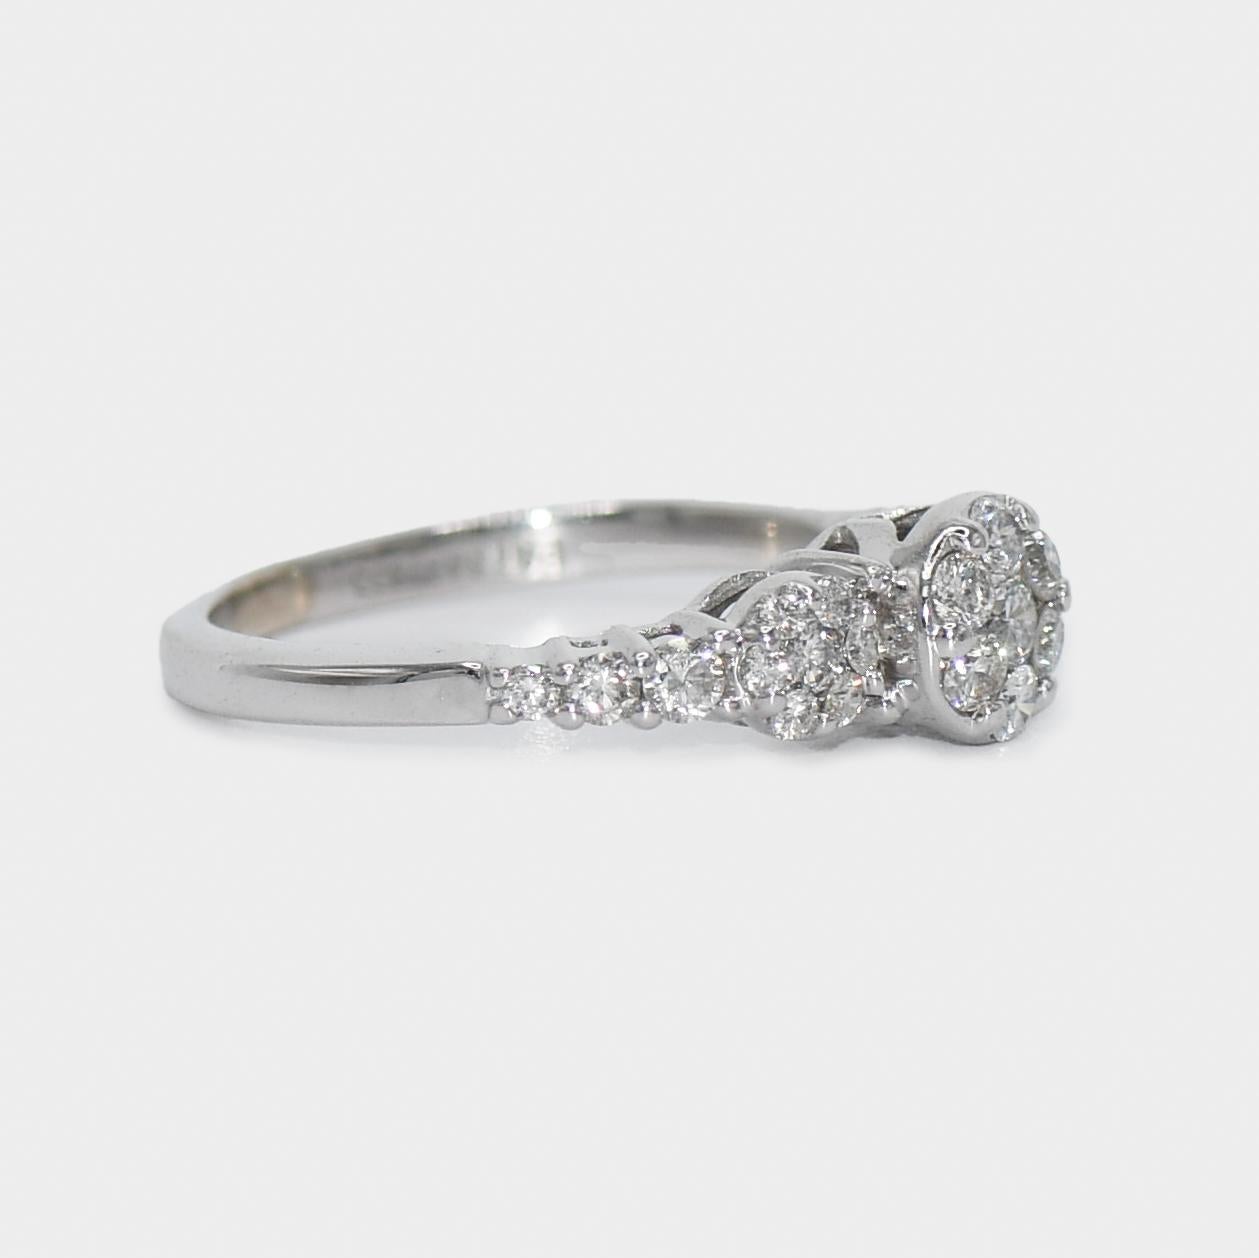 14K White Gold Ladies' Diamond Cluster Ring 0.40tdw, 2.6g
Ladies diamond cluster ring with 14k white gold setting.
Stamped 14k and weighs 2.6 grams.
The diamonds are round brilliant cuts, .40 total carats, H to i color, Si clarity, good cuts.
Ring